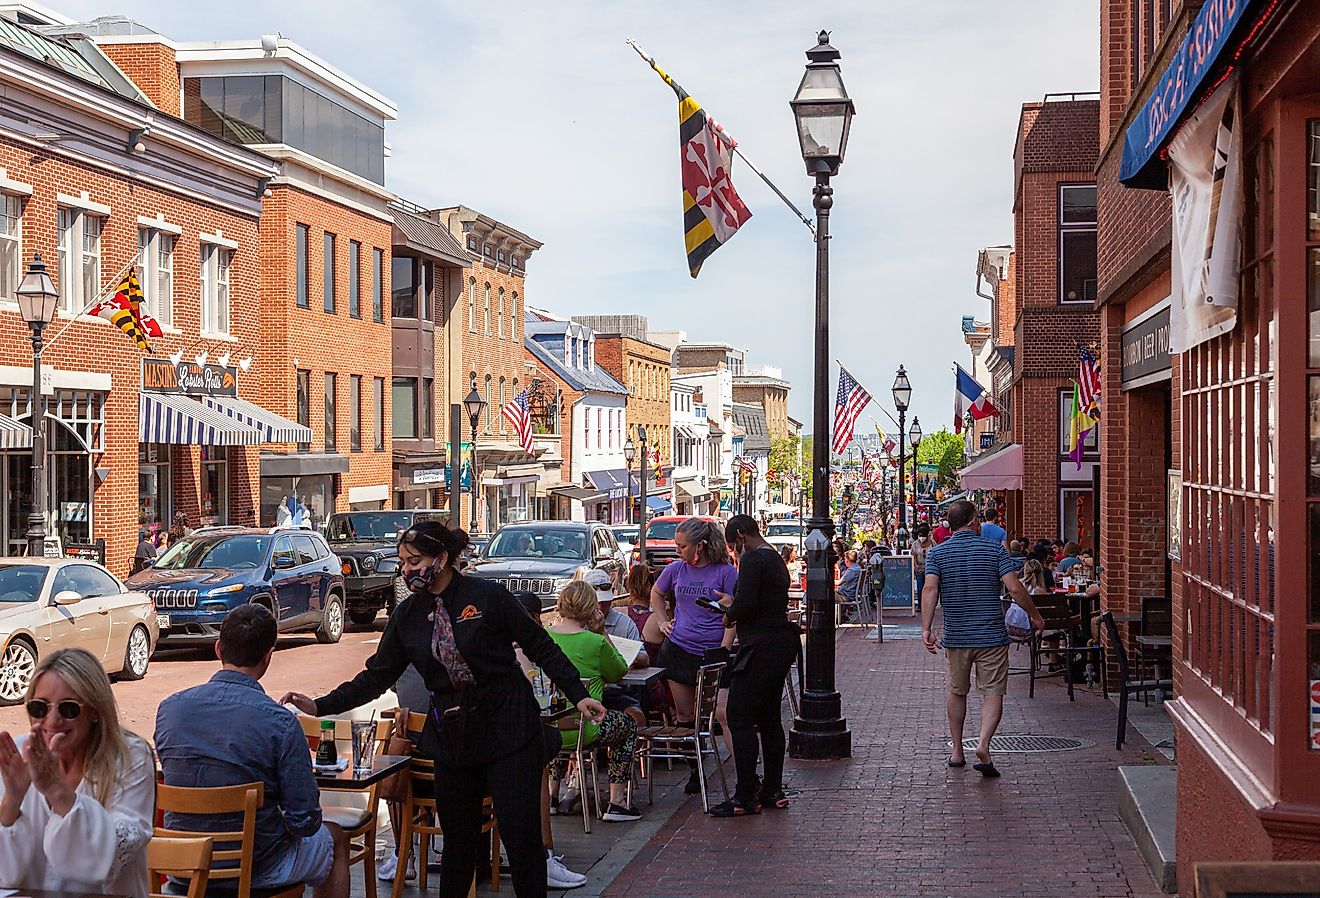 Street view of Annapolis, Maryland with people walking in the historic town. Image credit grandbrothers via Shutterstock